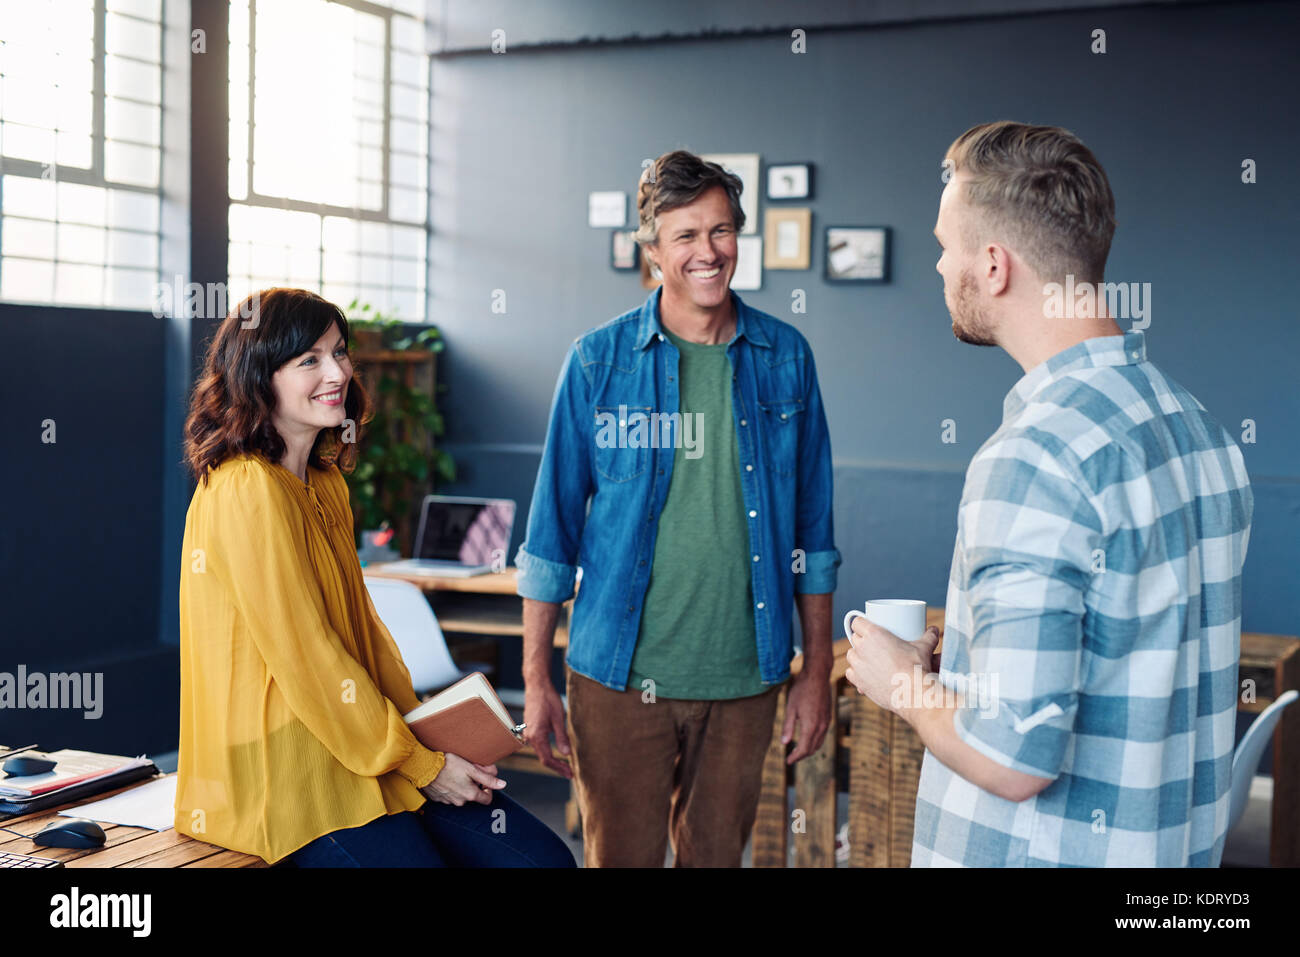 Three coworkers smiling and talking together in a modern office Stock Photo